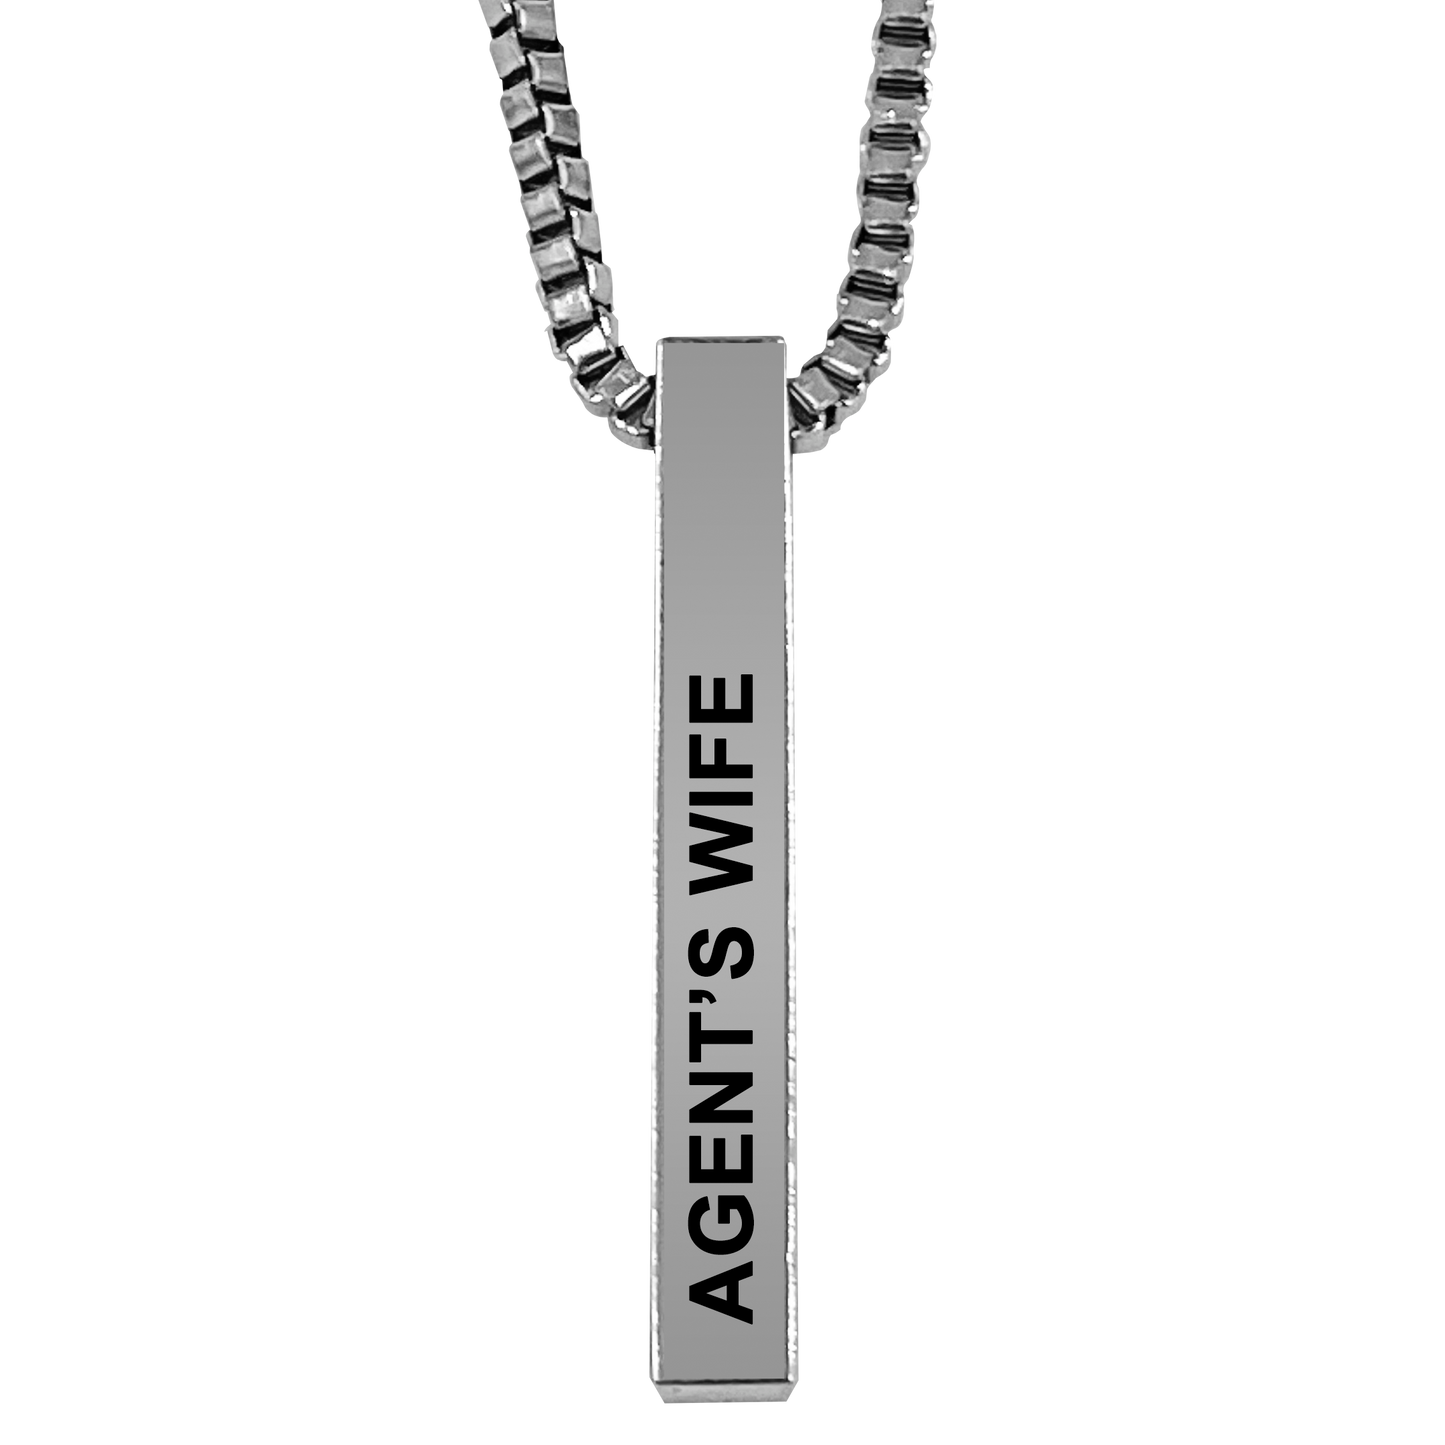 Agent's Wife Silver Plated Pillar Bar Pendant Necklace Gift Mother's Day Christmas Holiday Anniversary Police Officer First Responder Law Enforcement